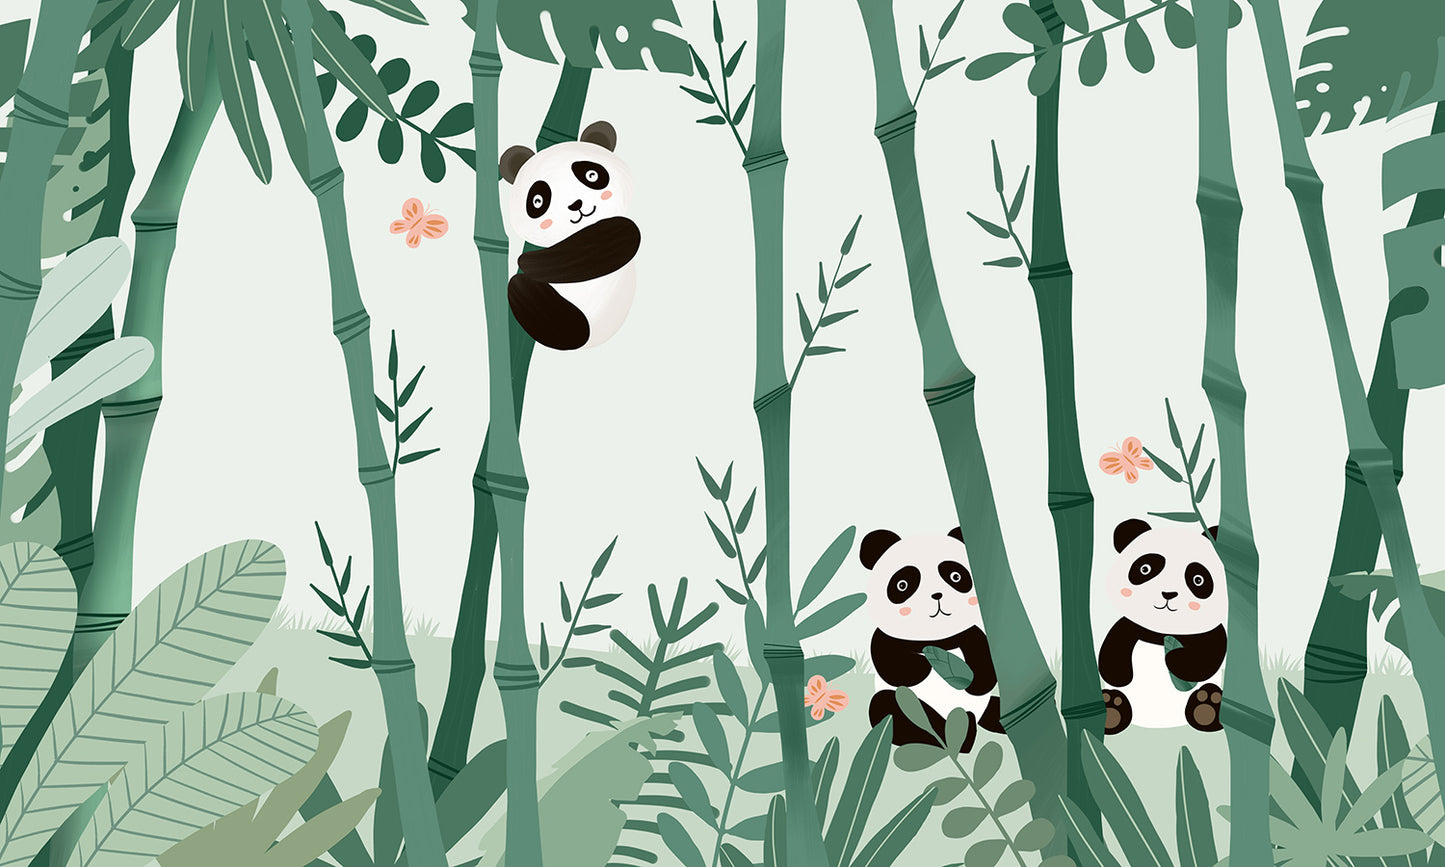 Animal Wallpaper Mural with a Panda and Bamboo for a Nursery Room